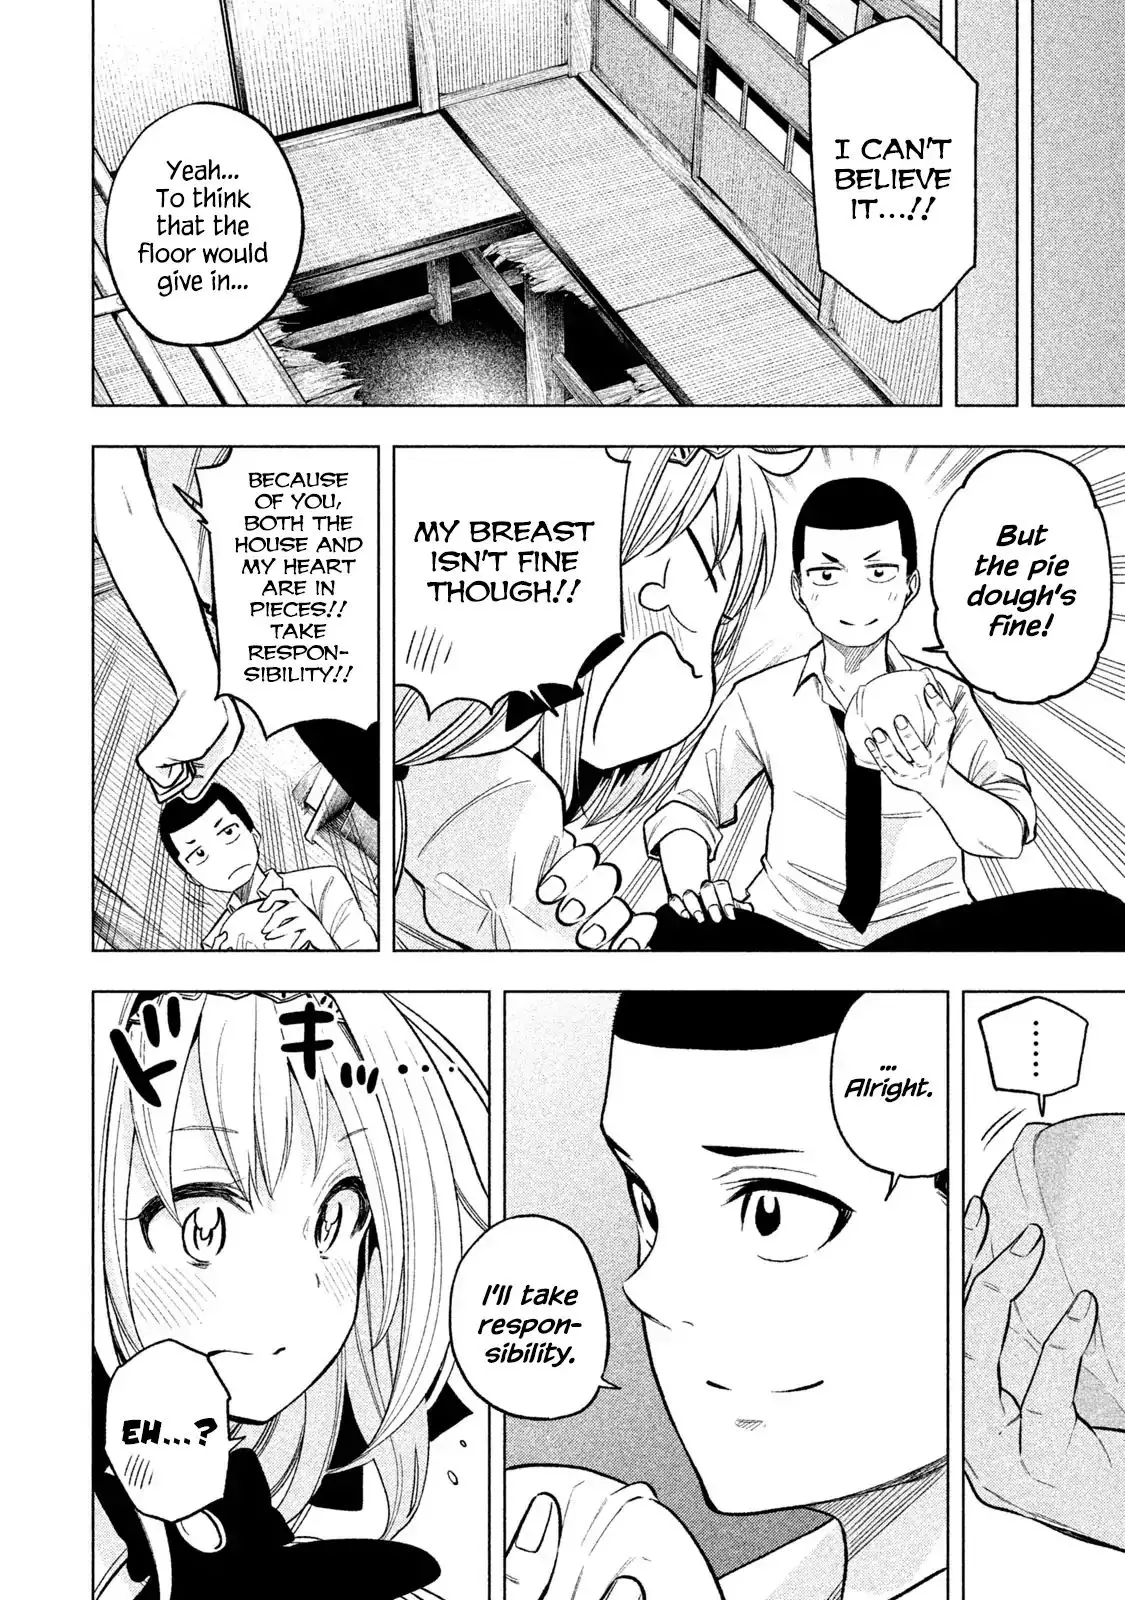 Why are you here Sensei!? - 46 page 13